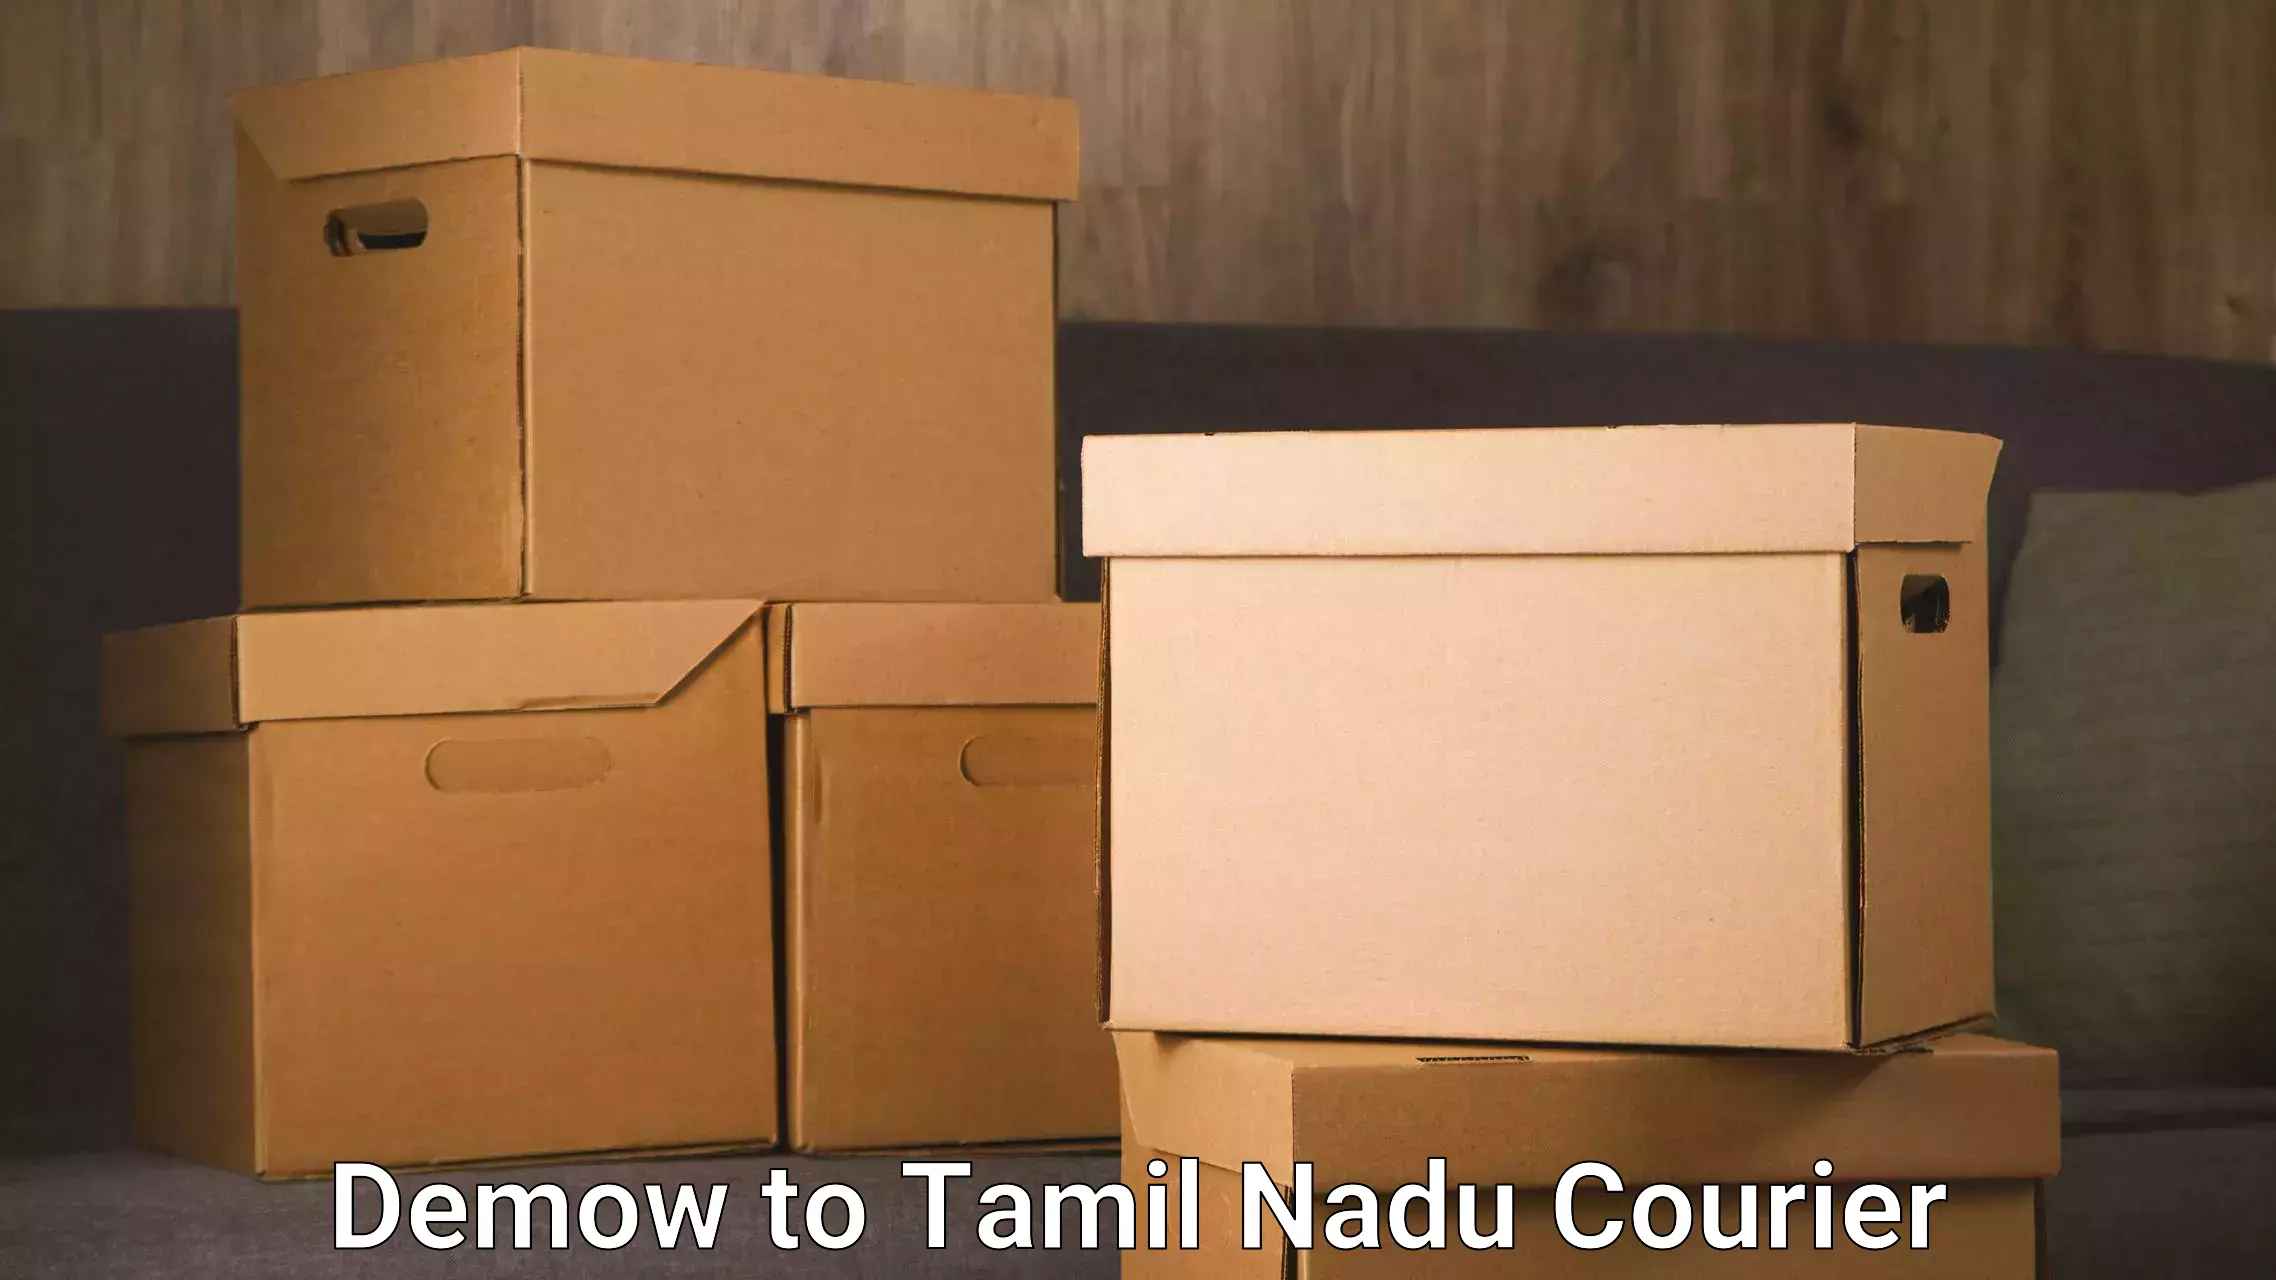 Courier service partnerships Demow to Tamil Nadu